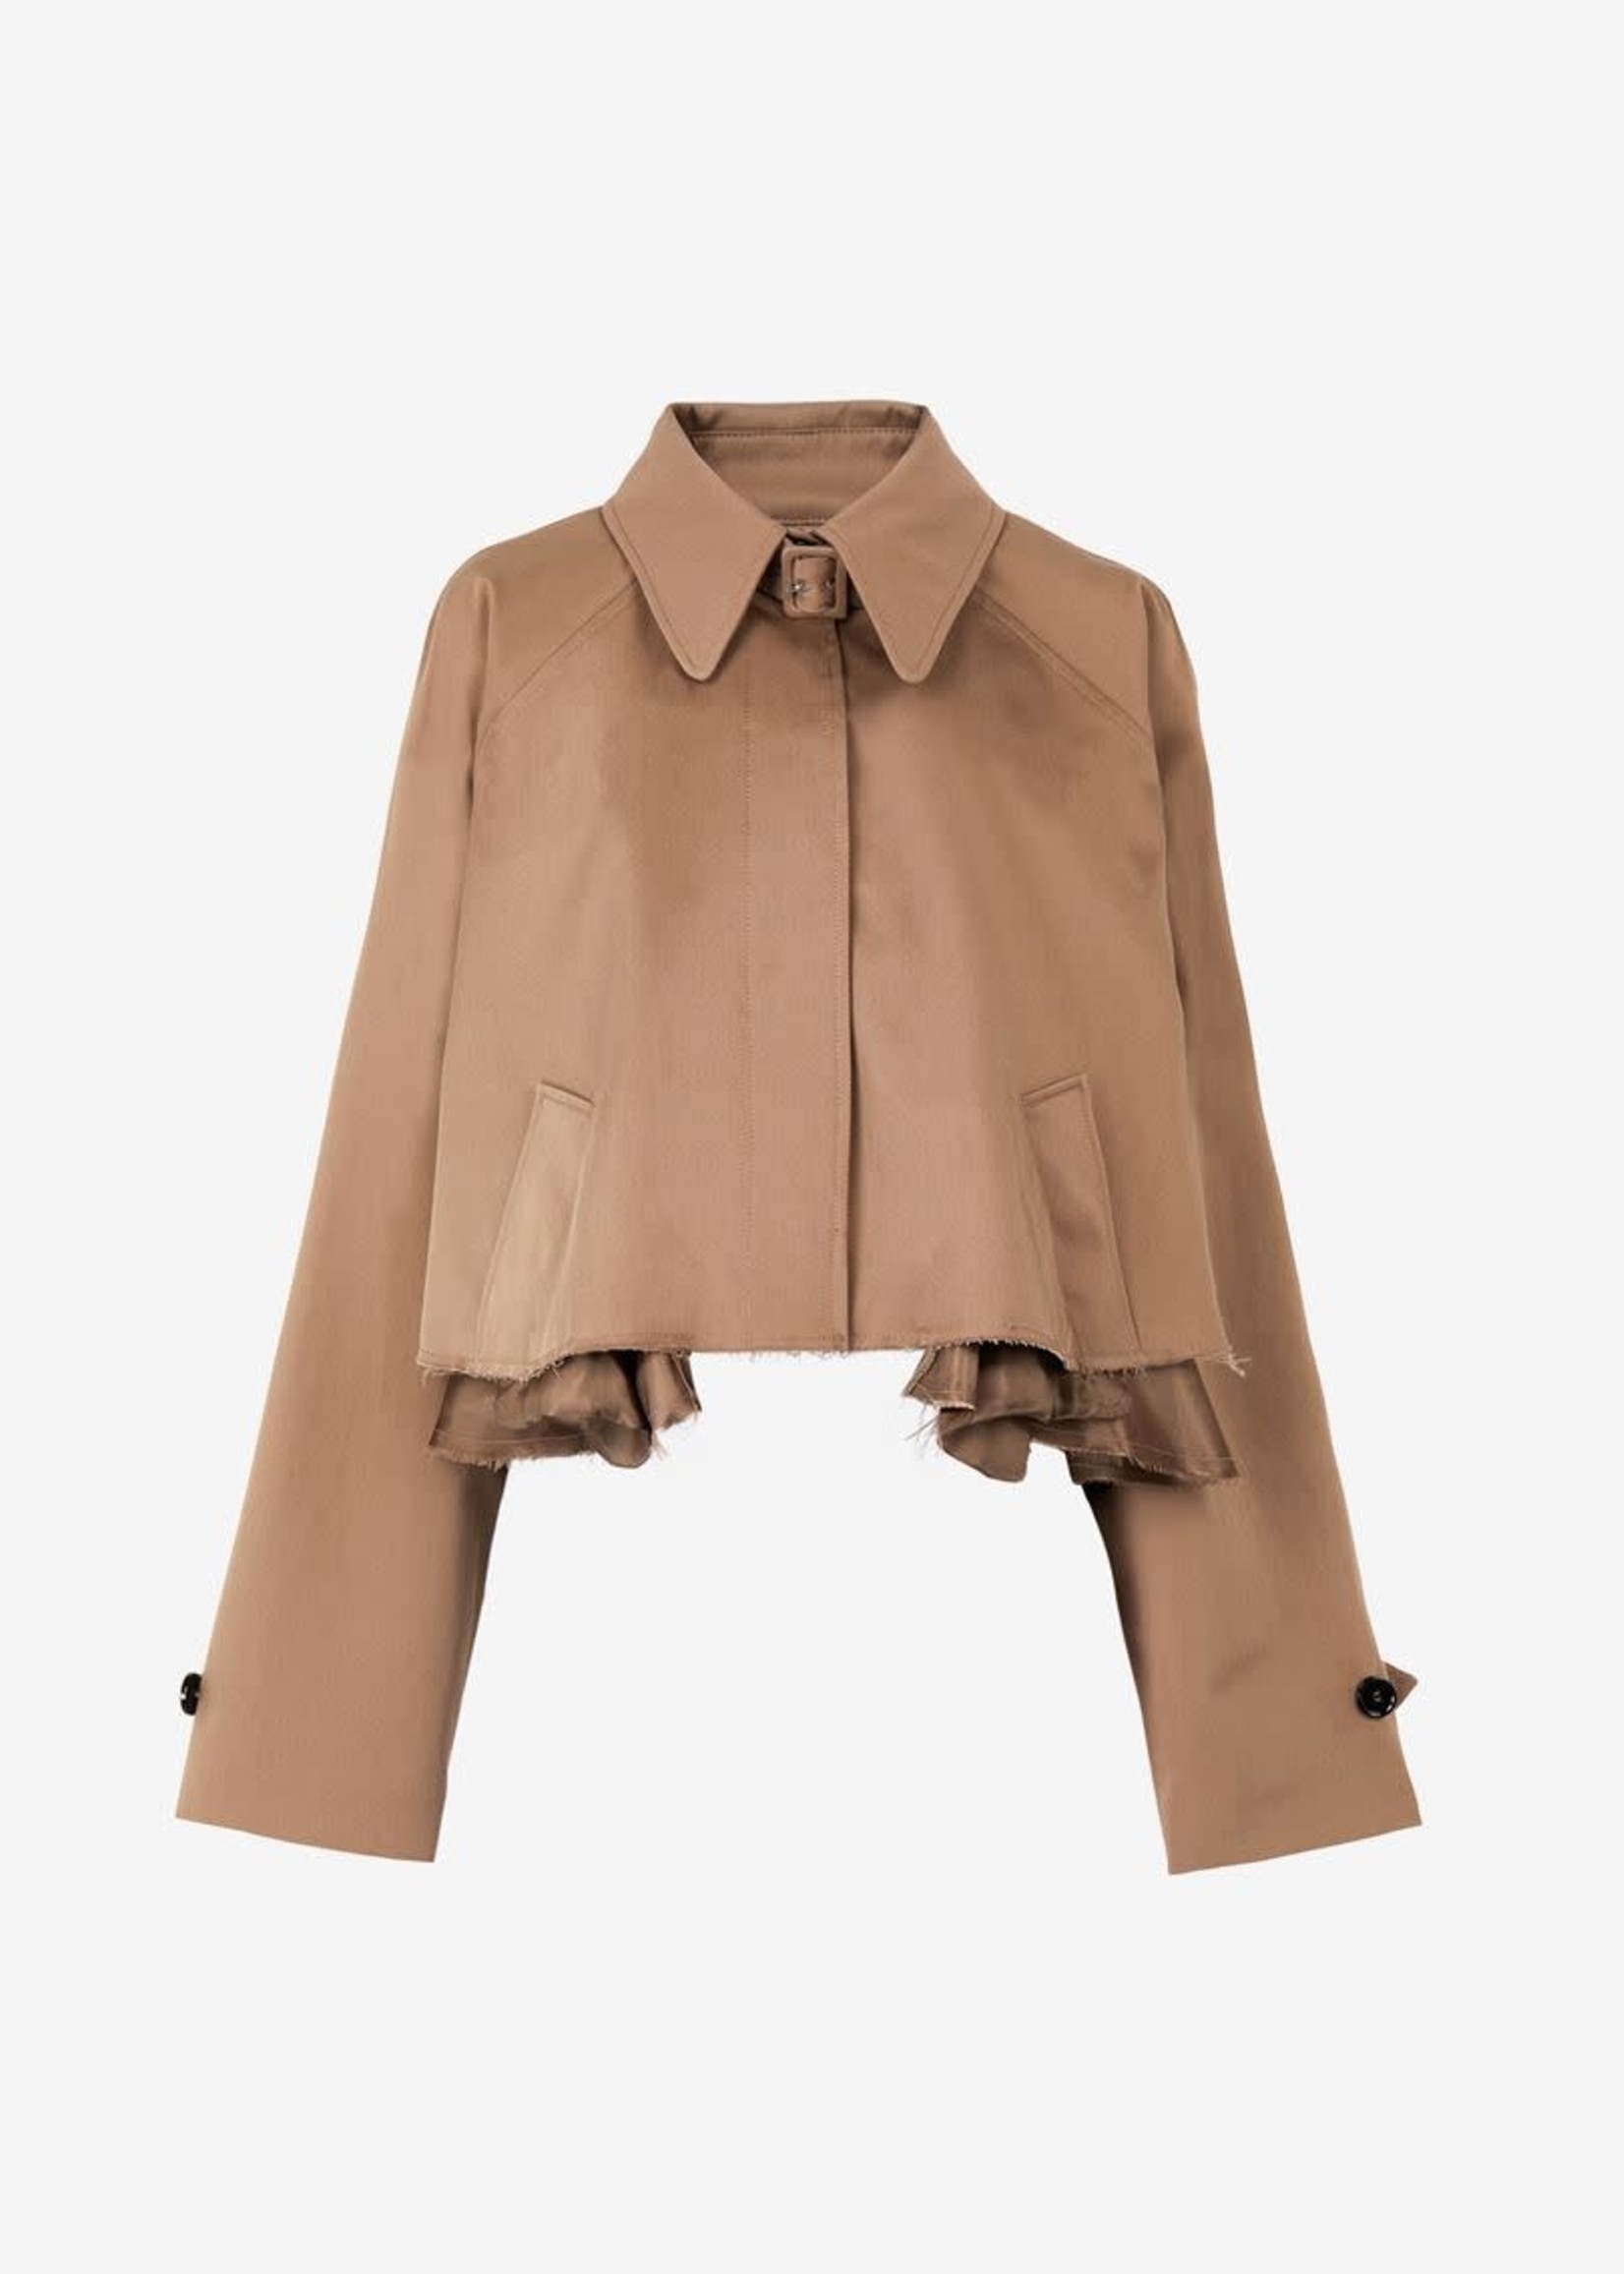 MM6 MAISON MARGIELA Cut Off Cropped Trench Coat in Brown